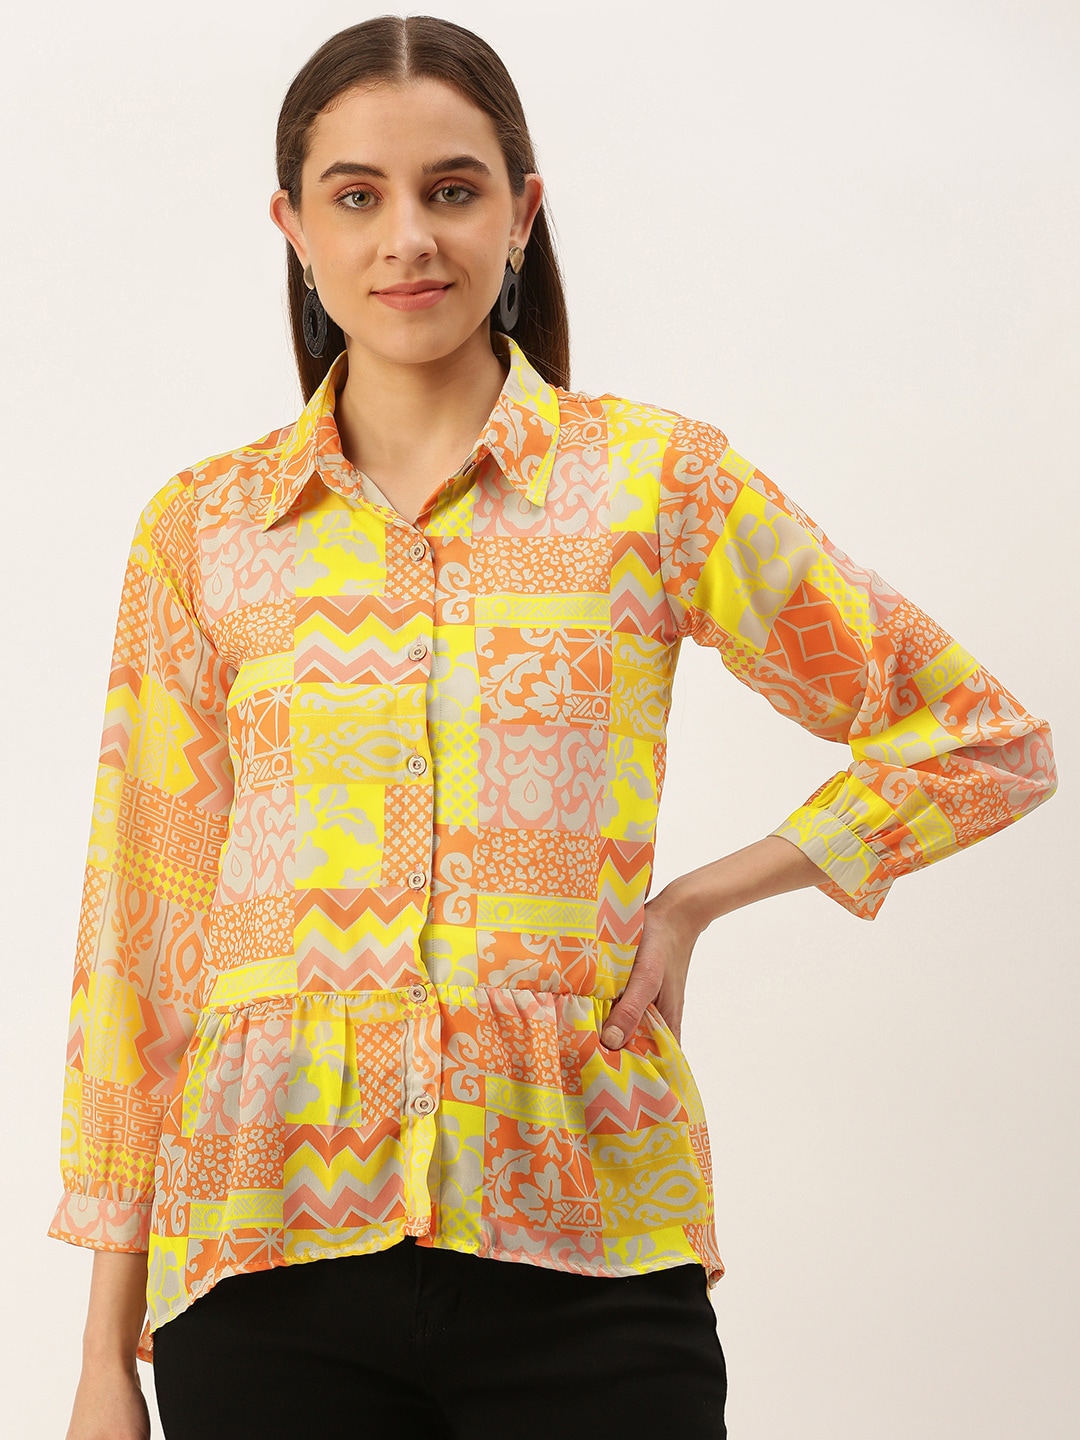 MELOSO Yellow & Orange Tribal Print Georgette Shirt Style Top Price in India